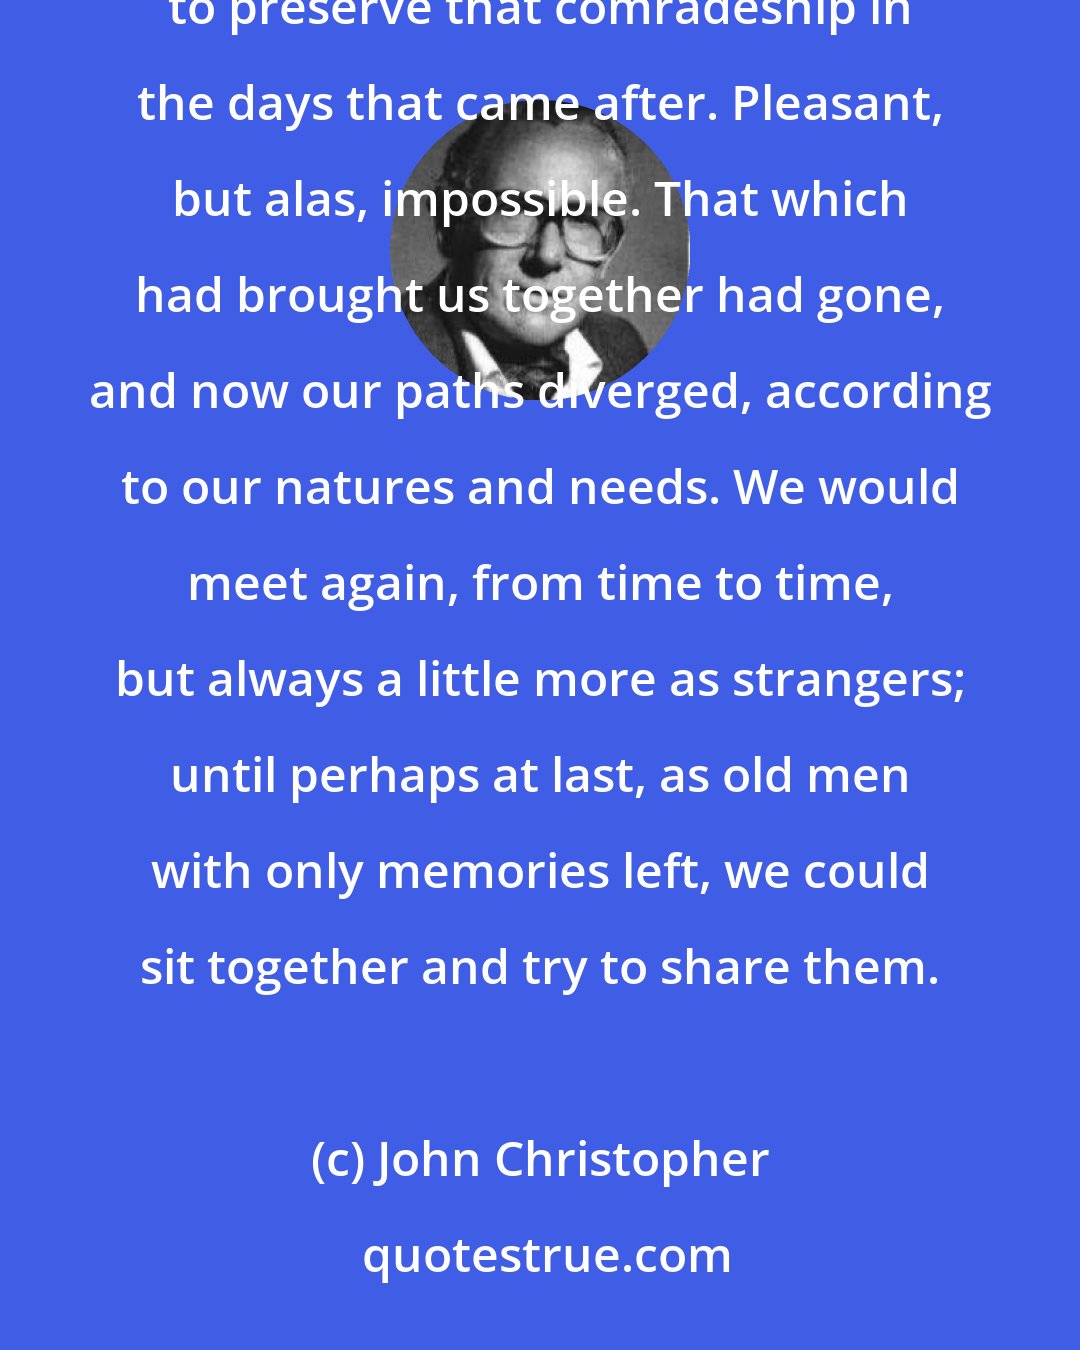 John Christopher: I was remembering the things we had done together, the times we had had. It would have been pleasant to preserve that comradeship in the days that came after. Pleasant, but alas, impossible. That which had brought us together had gone, and now our paths diverged, according to our natures and needs. We would meet again, from time to time, but always a little more as strangers; until perhaps at last, as old men with only memories left, we could sit together and try to share them.